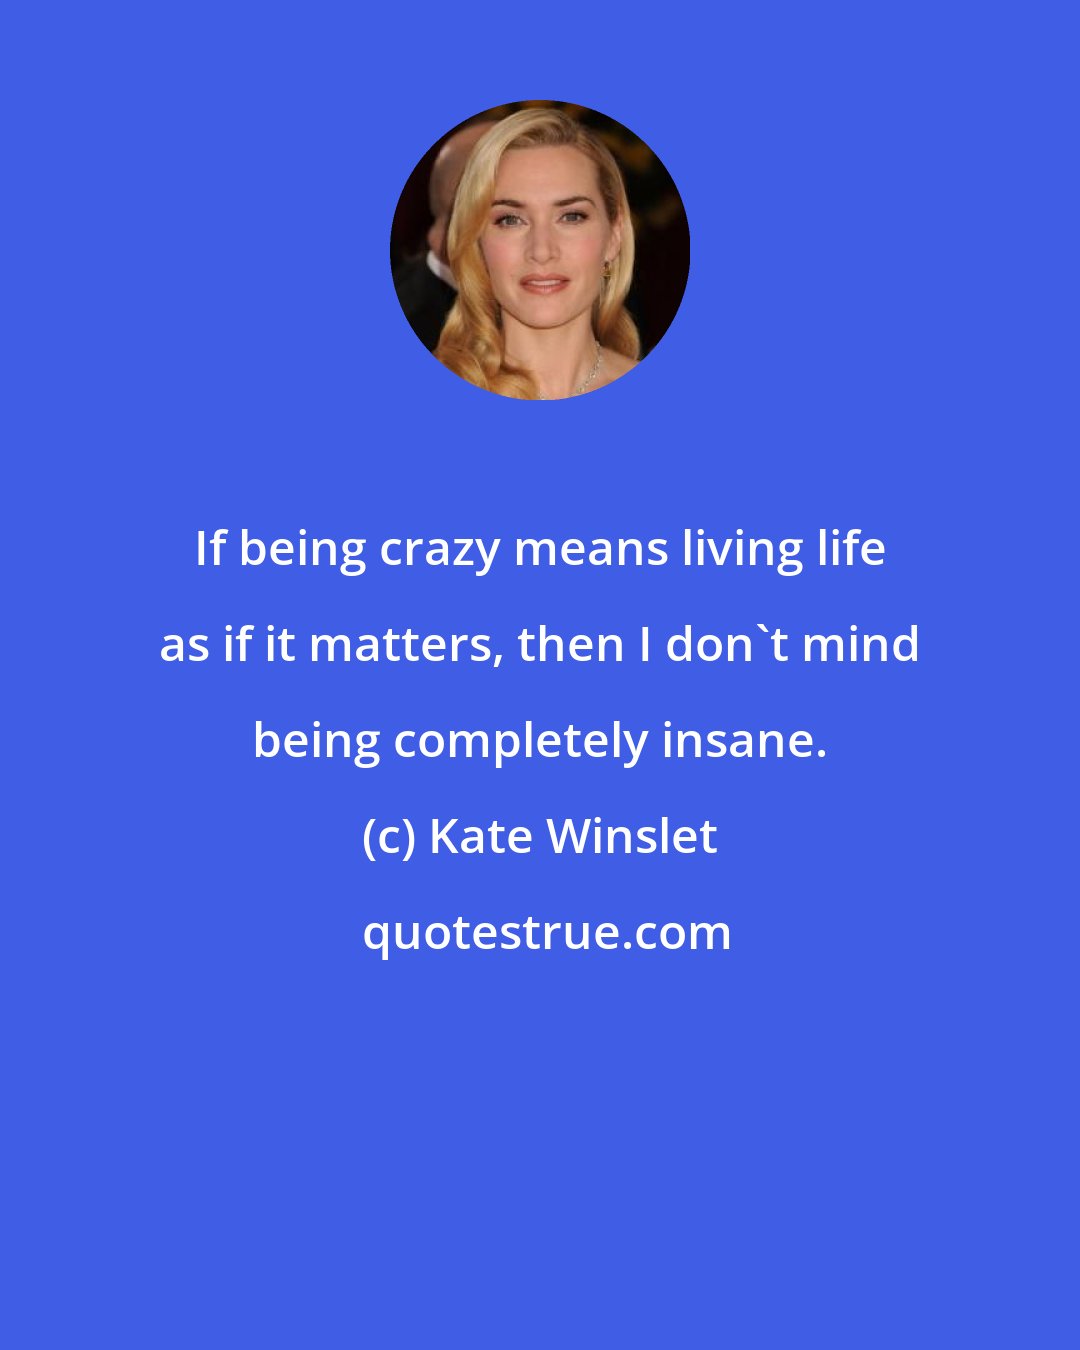 Kate Winslet: If being crazy means living life as if it matters, then I don't mind being completely insane.